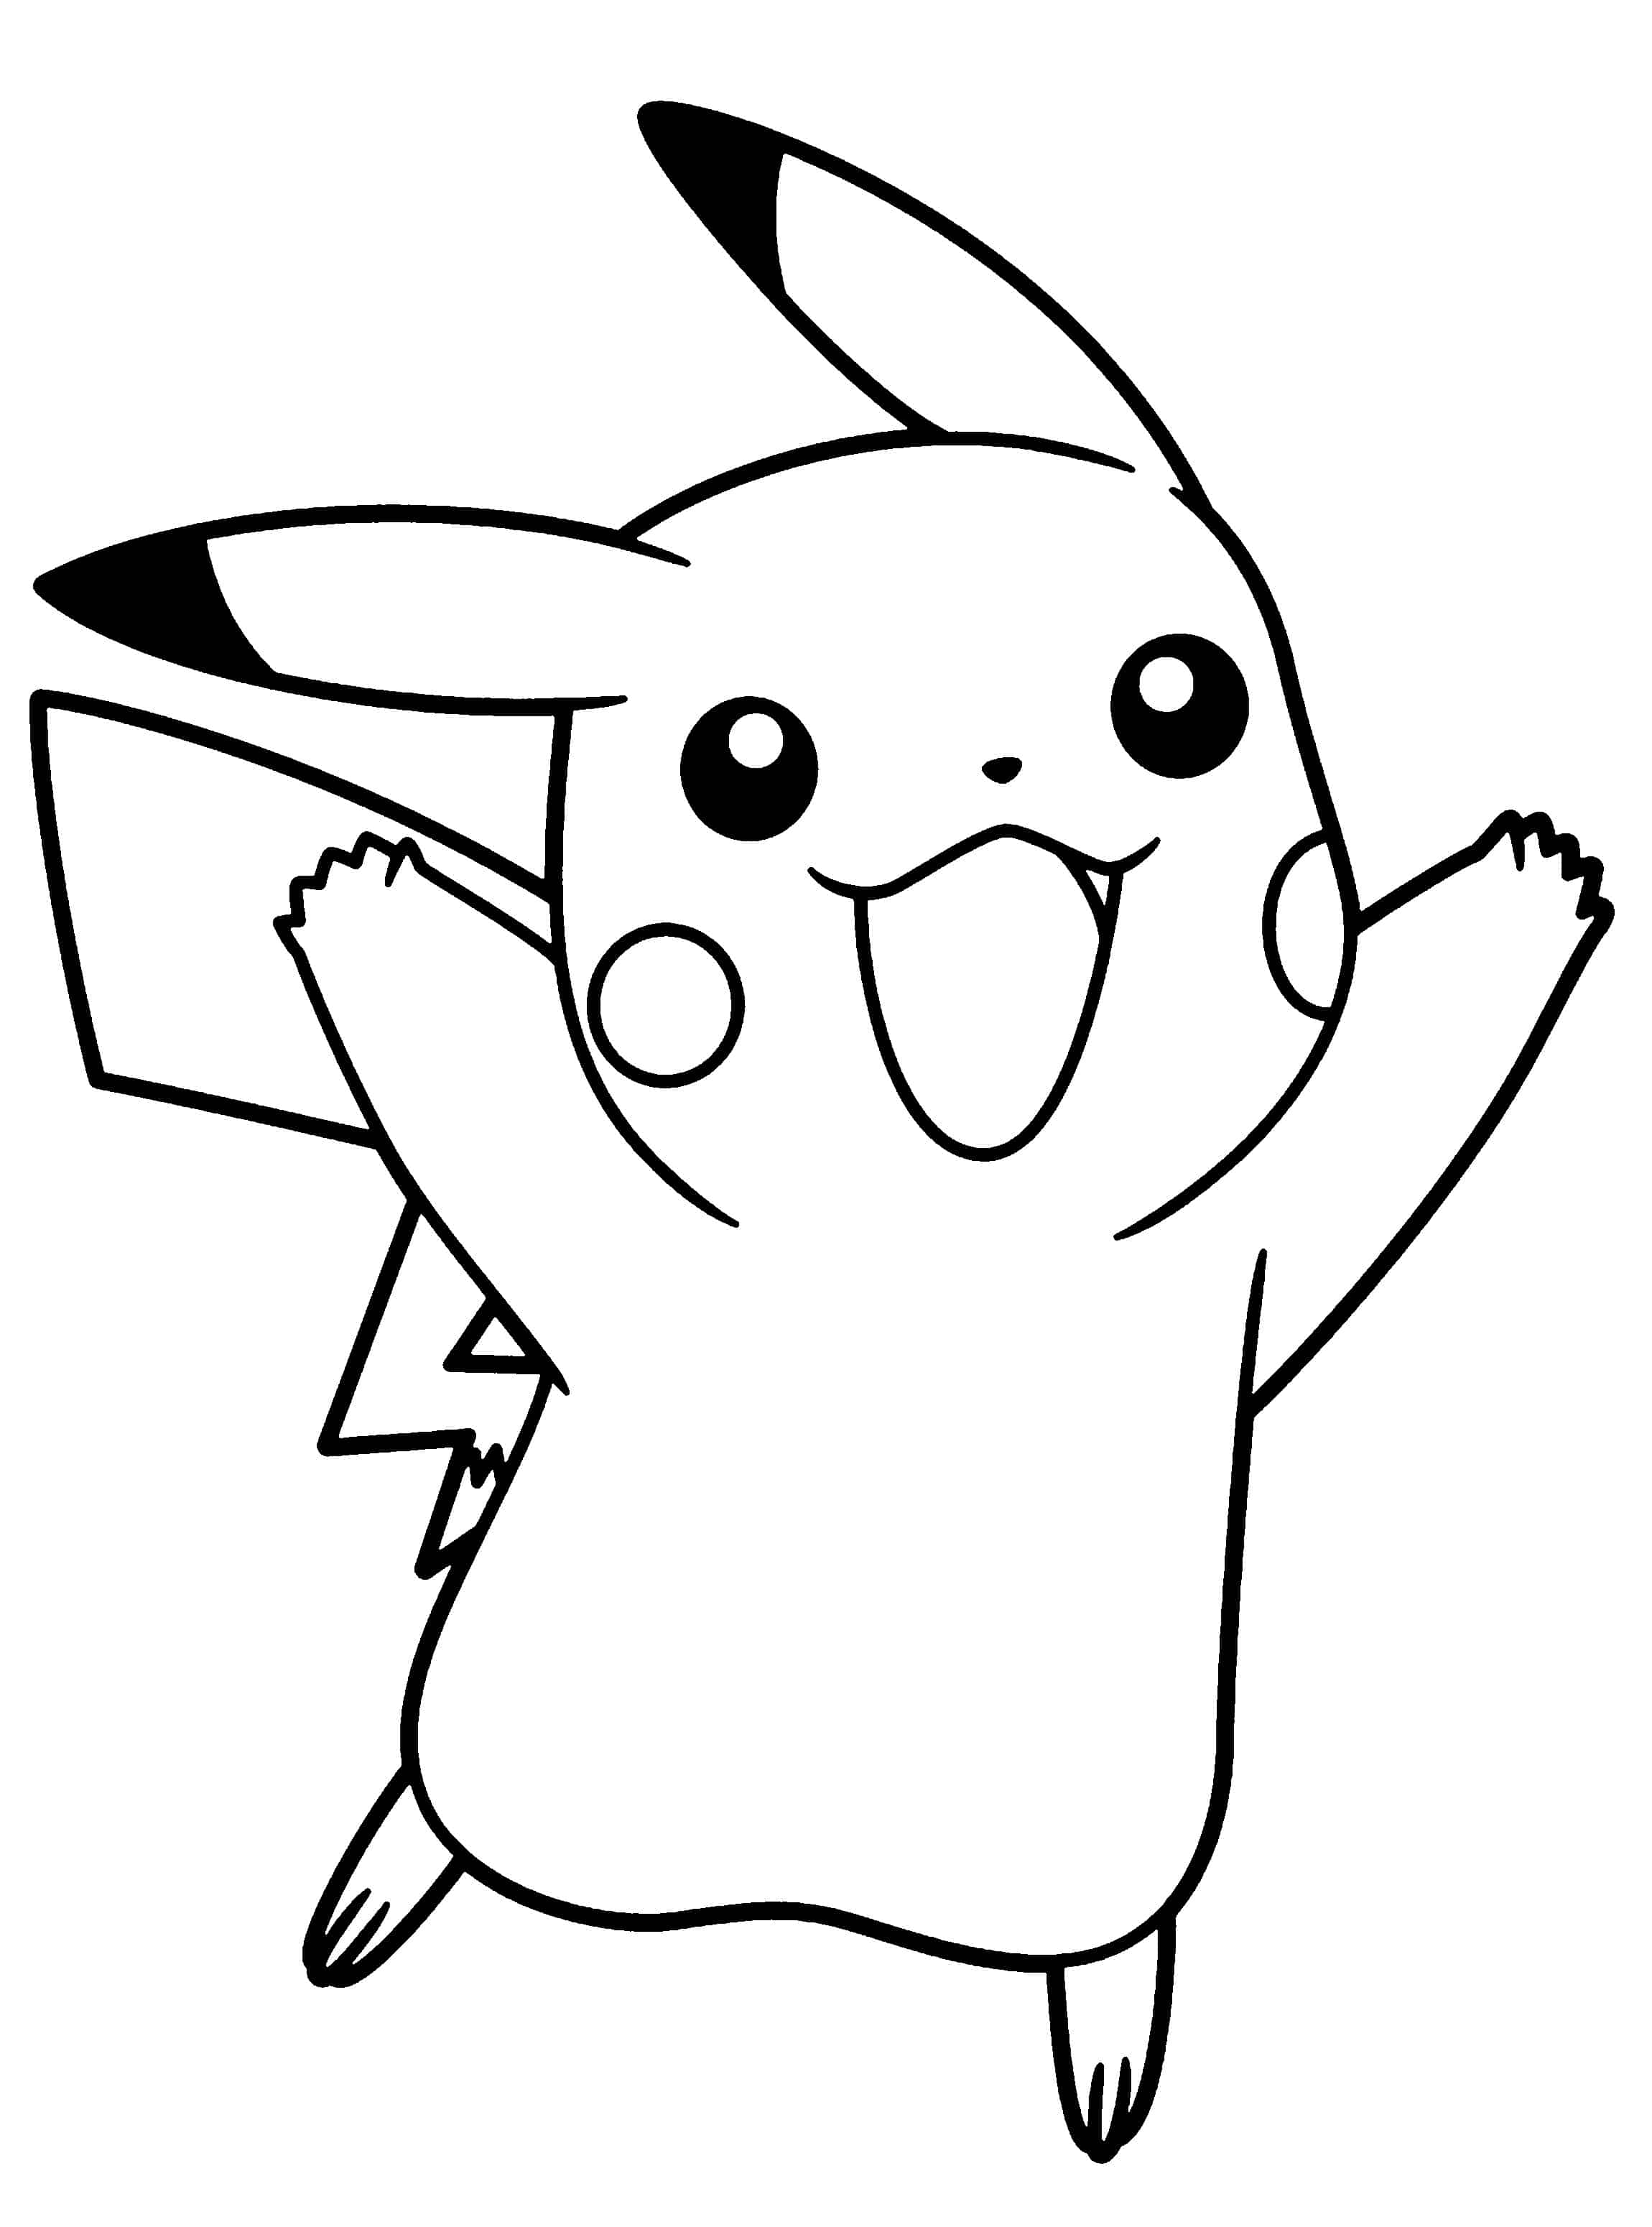 pikachu pokemon coloring pages